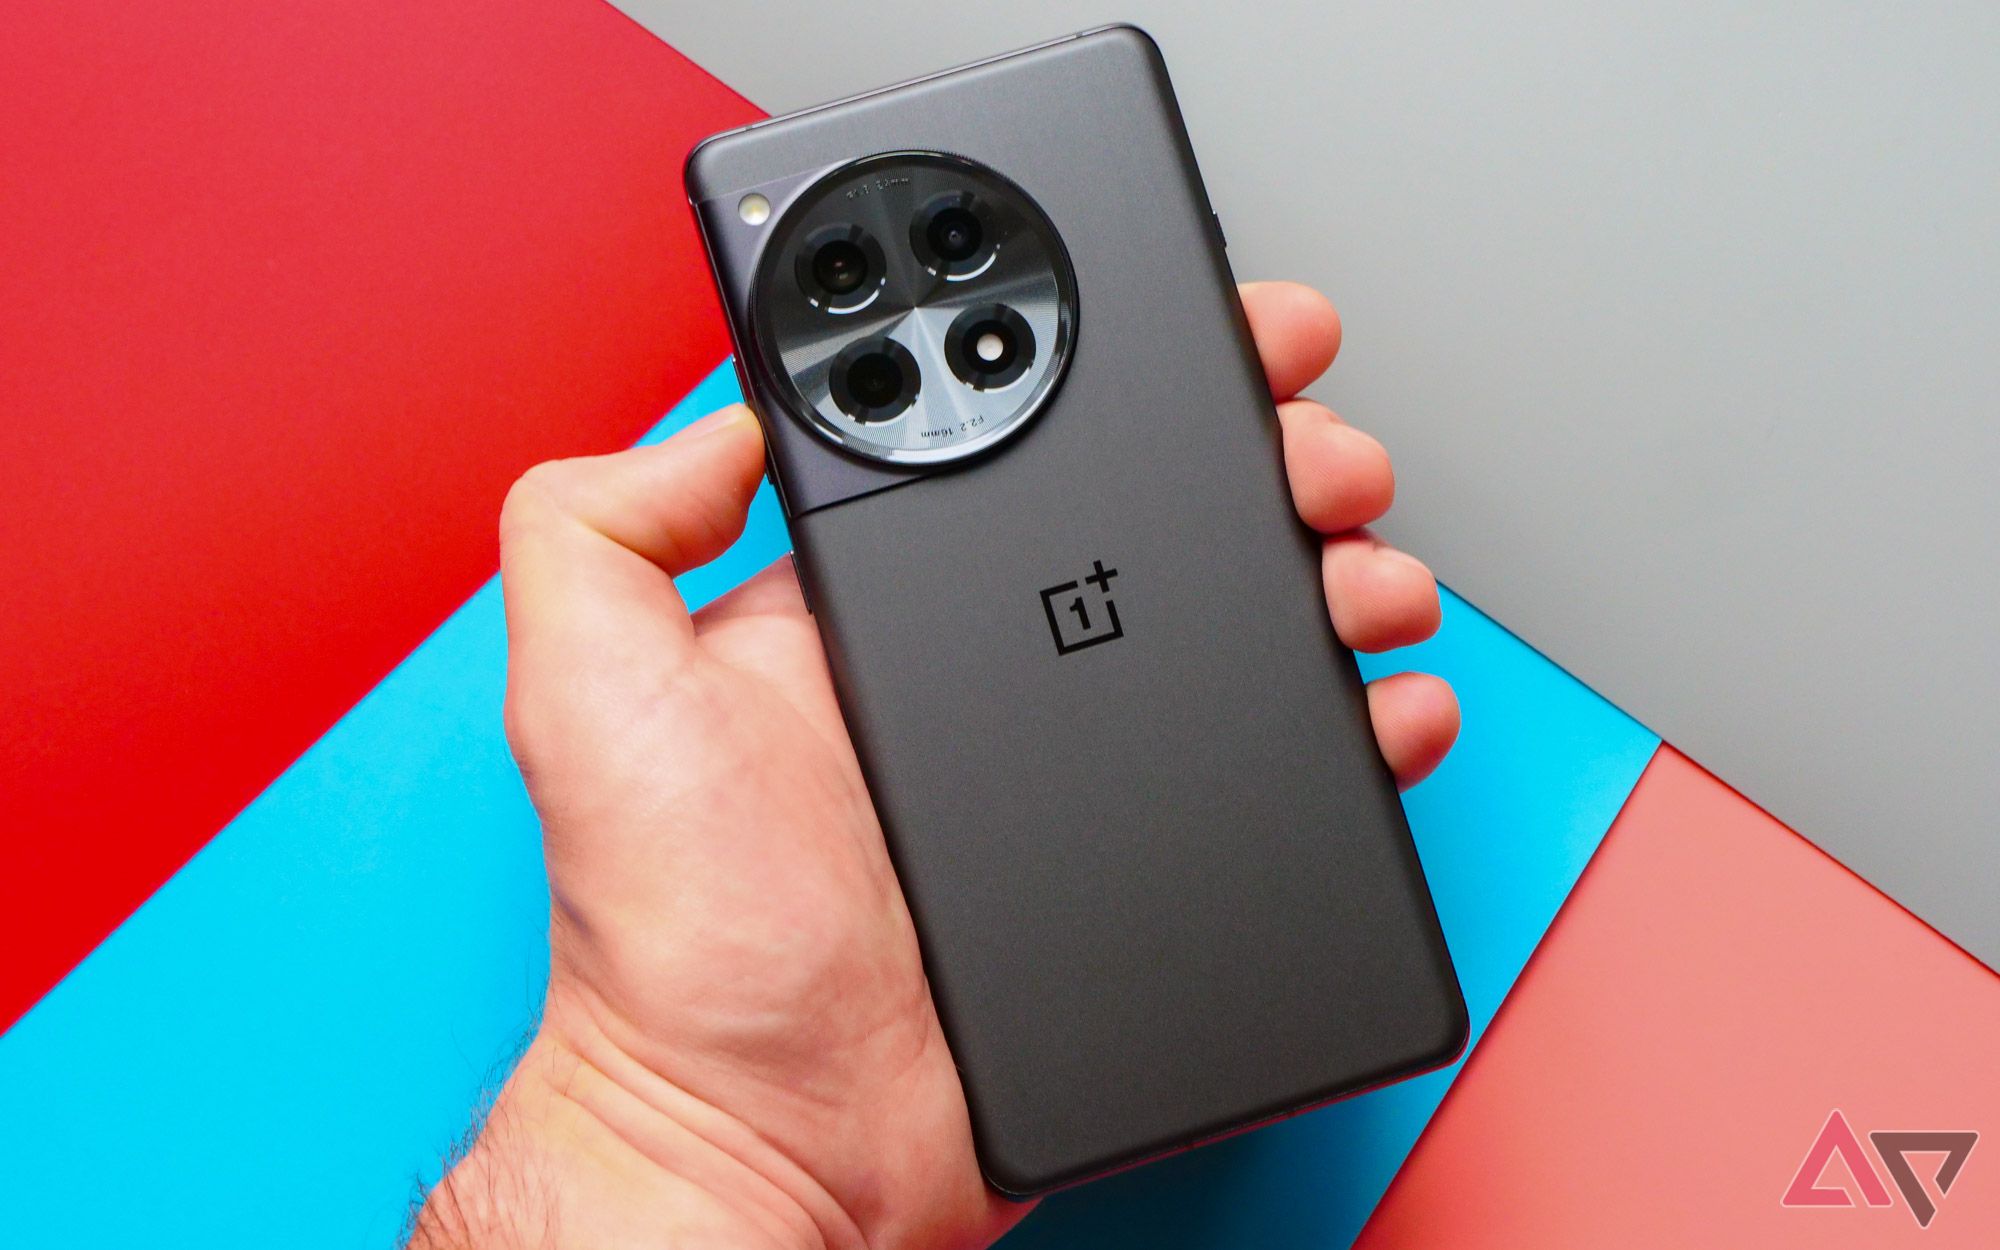 With promise of 5 years of updates and key battery tuning, OnePlus